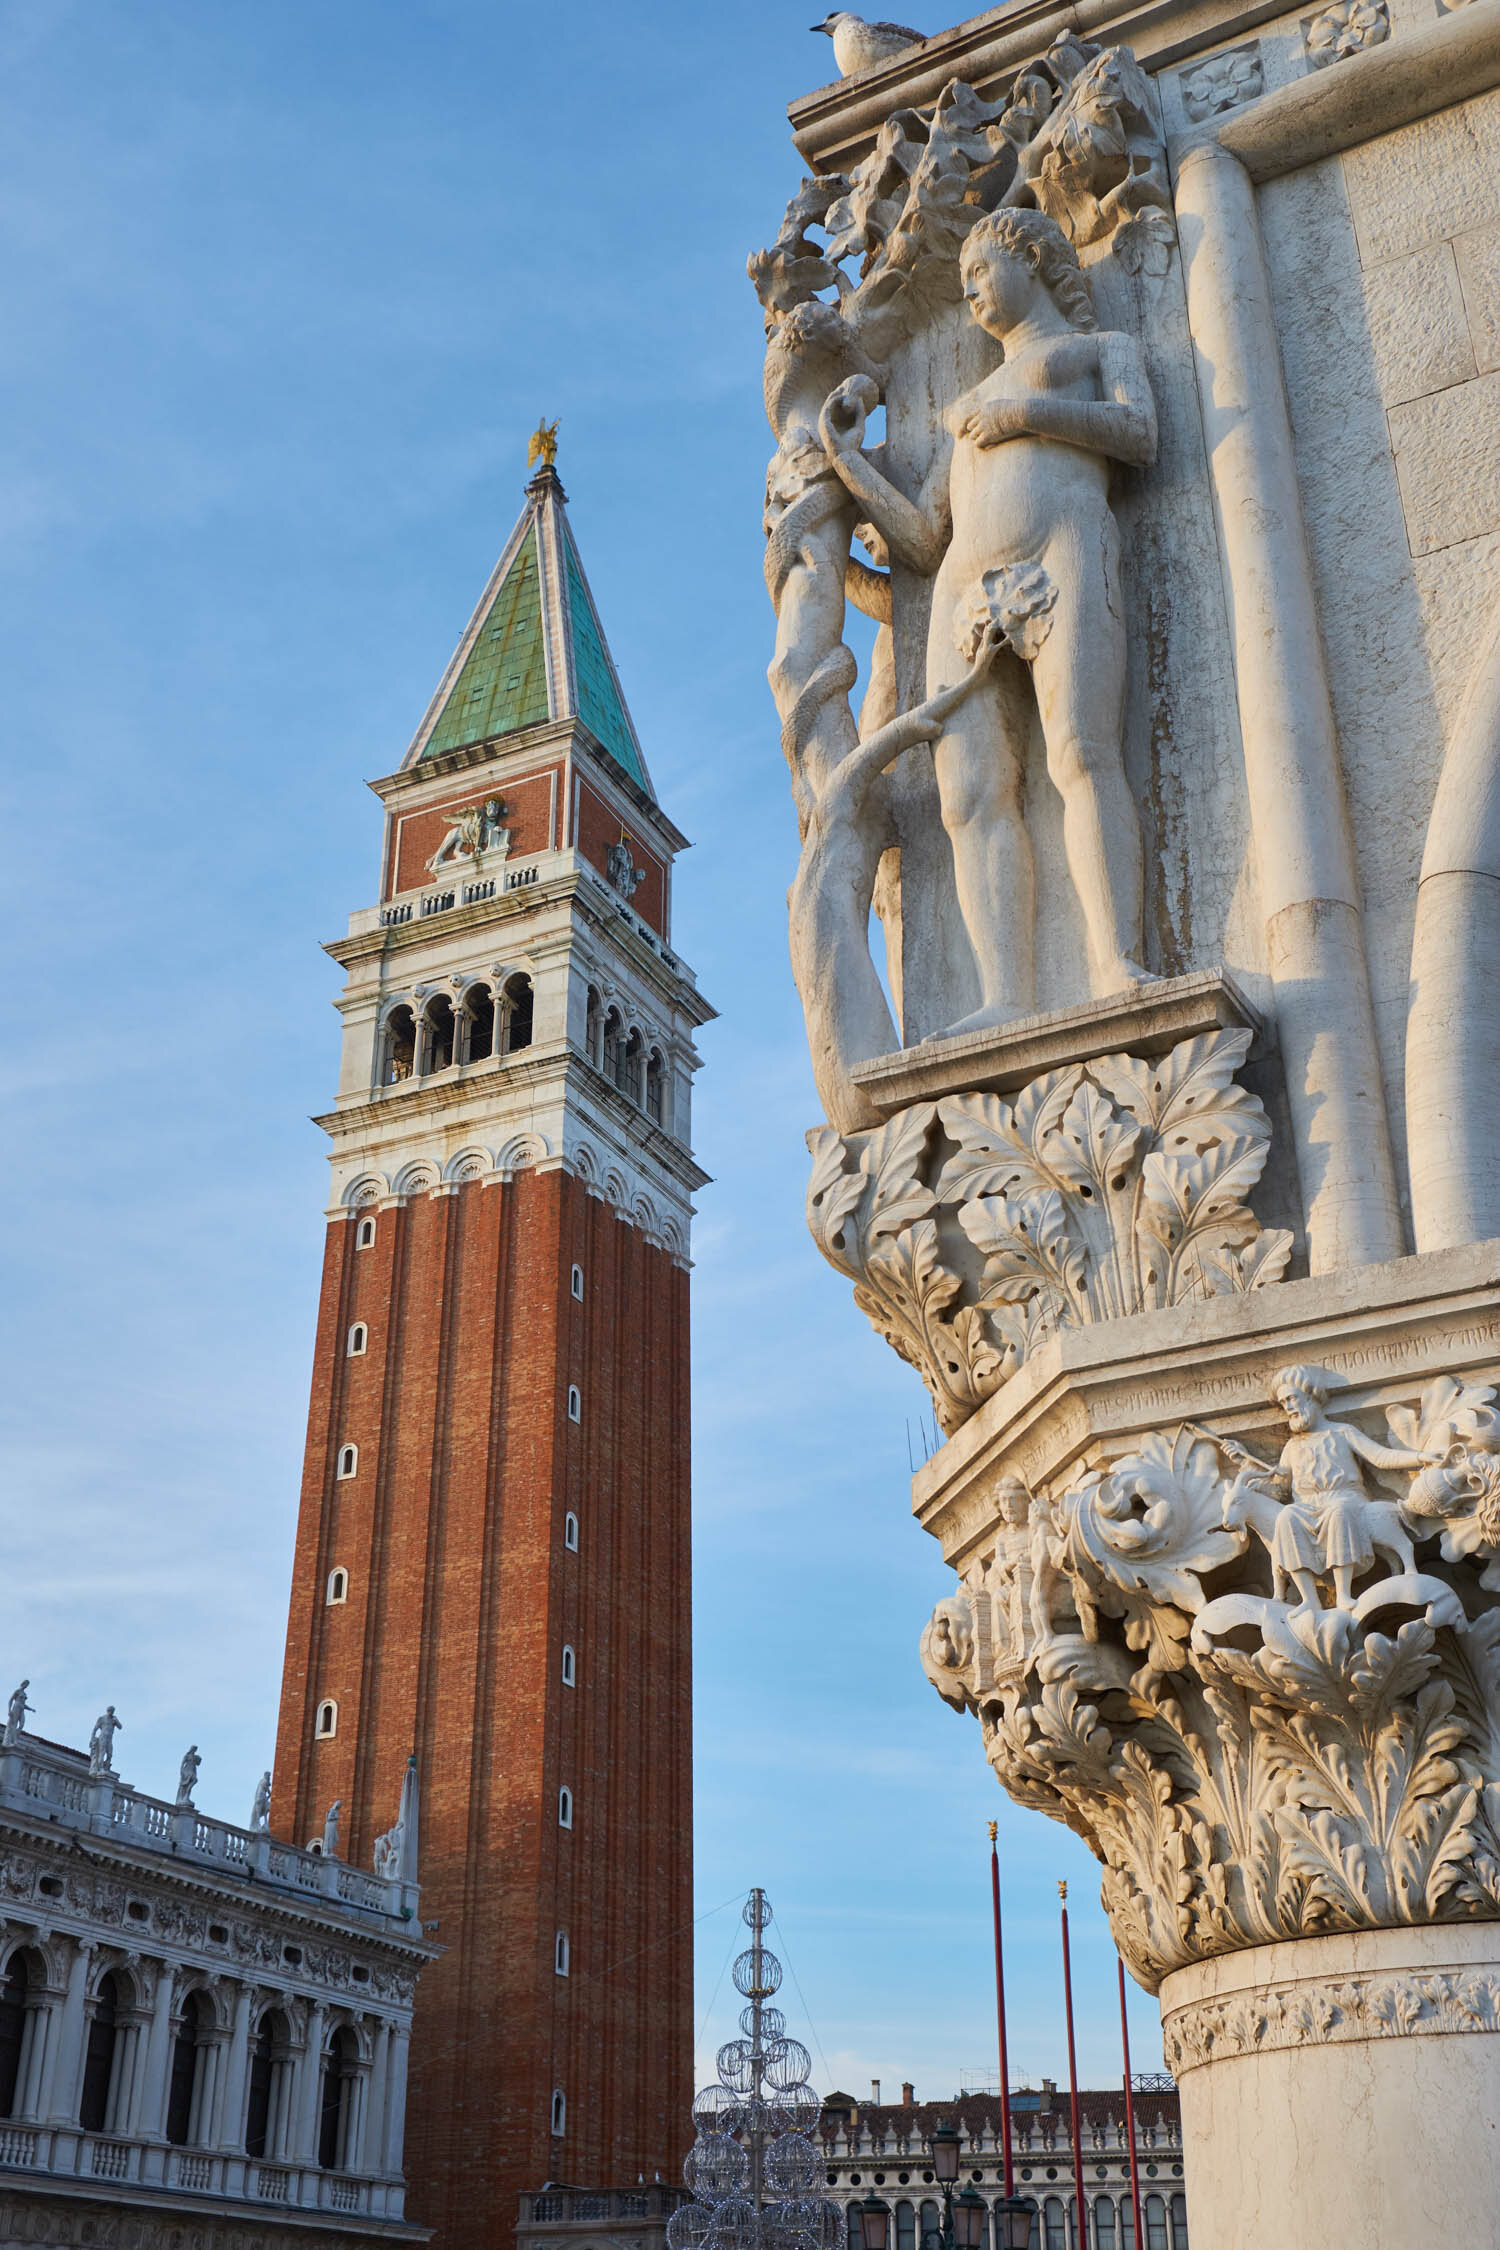 Campanile di San Marco and Doge's Palace detail, Venice